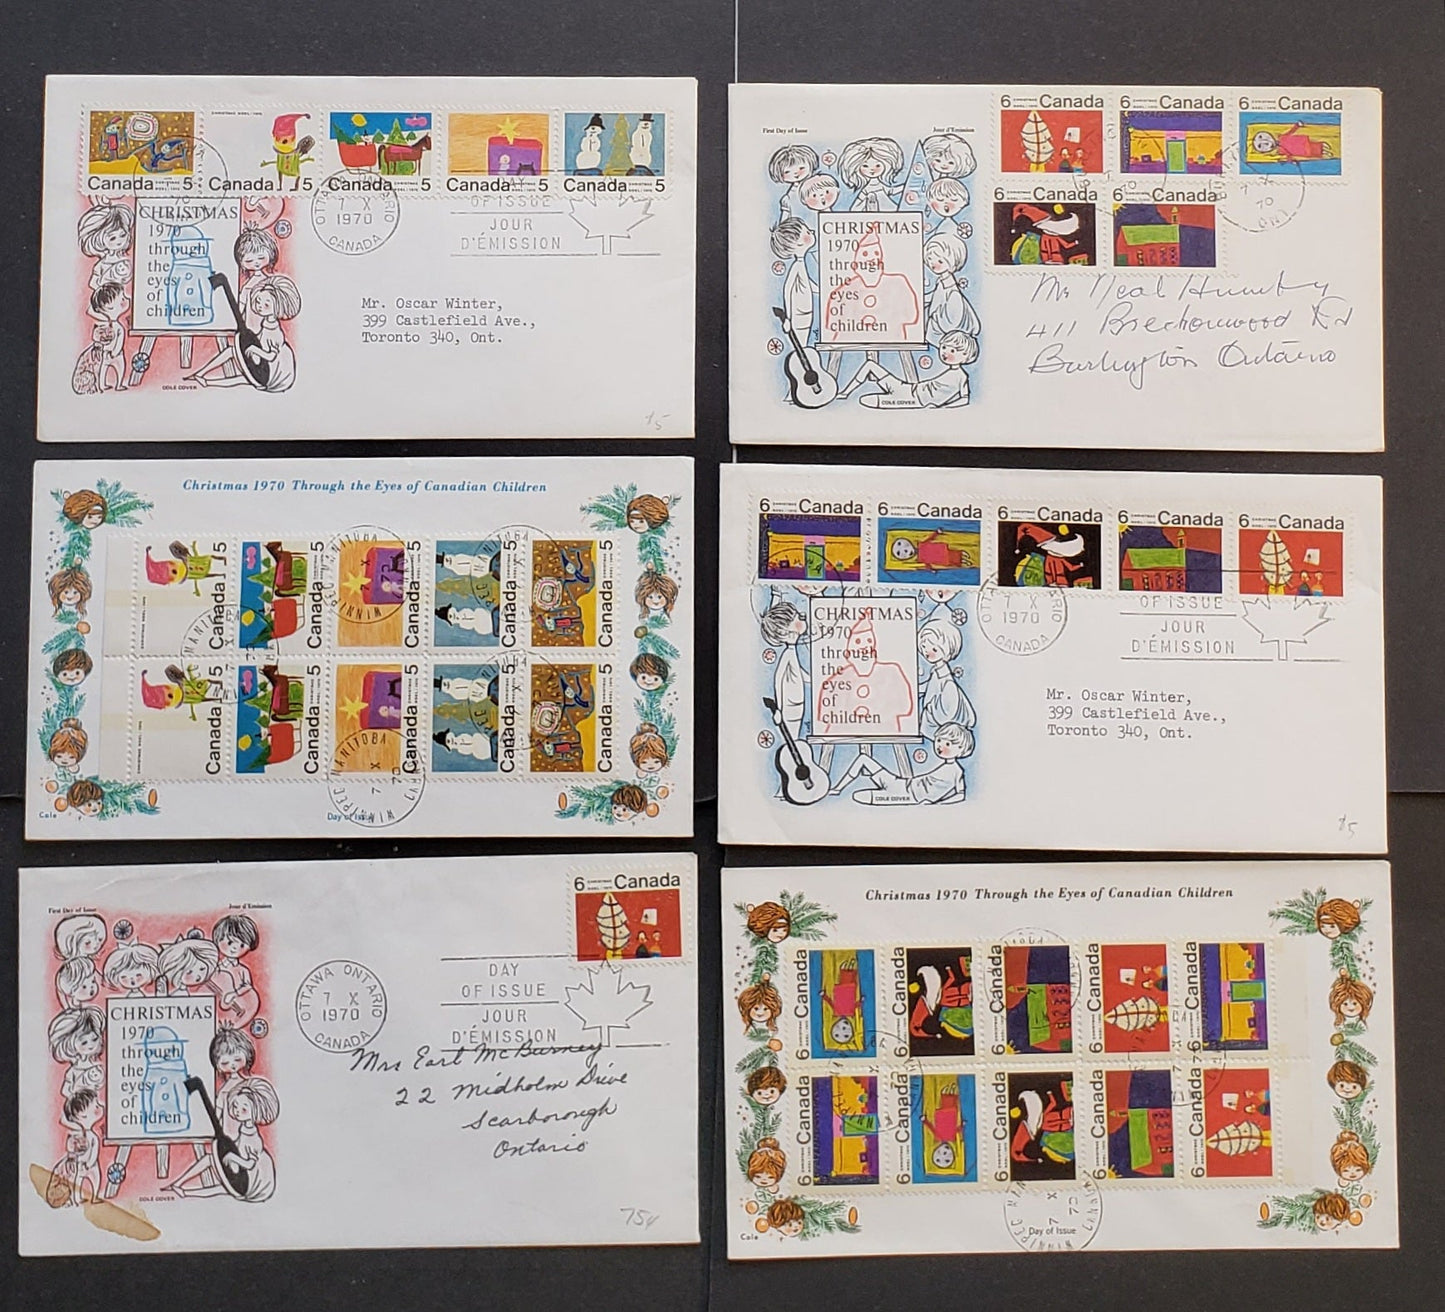 Lot 73 Canada #519-523, 519p-523p, 524-528, 525, 524p-528p, 529, 530 5c-15c Multicoloured Various Designs 1970 Christmas Issue, 9 Cole First Day Covers Franked With Strips, Blocks, Singles Tagged & Untagged, HF & HB  Paper,  Cat. Value $39